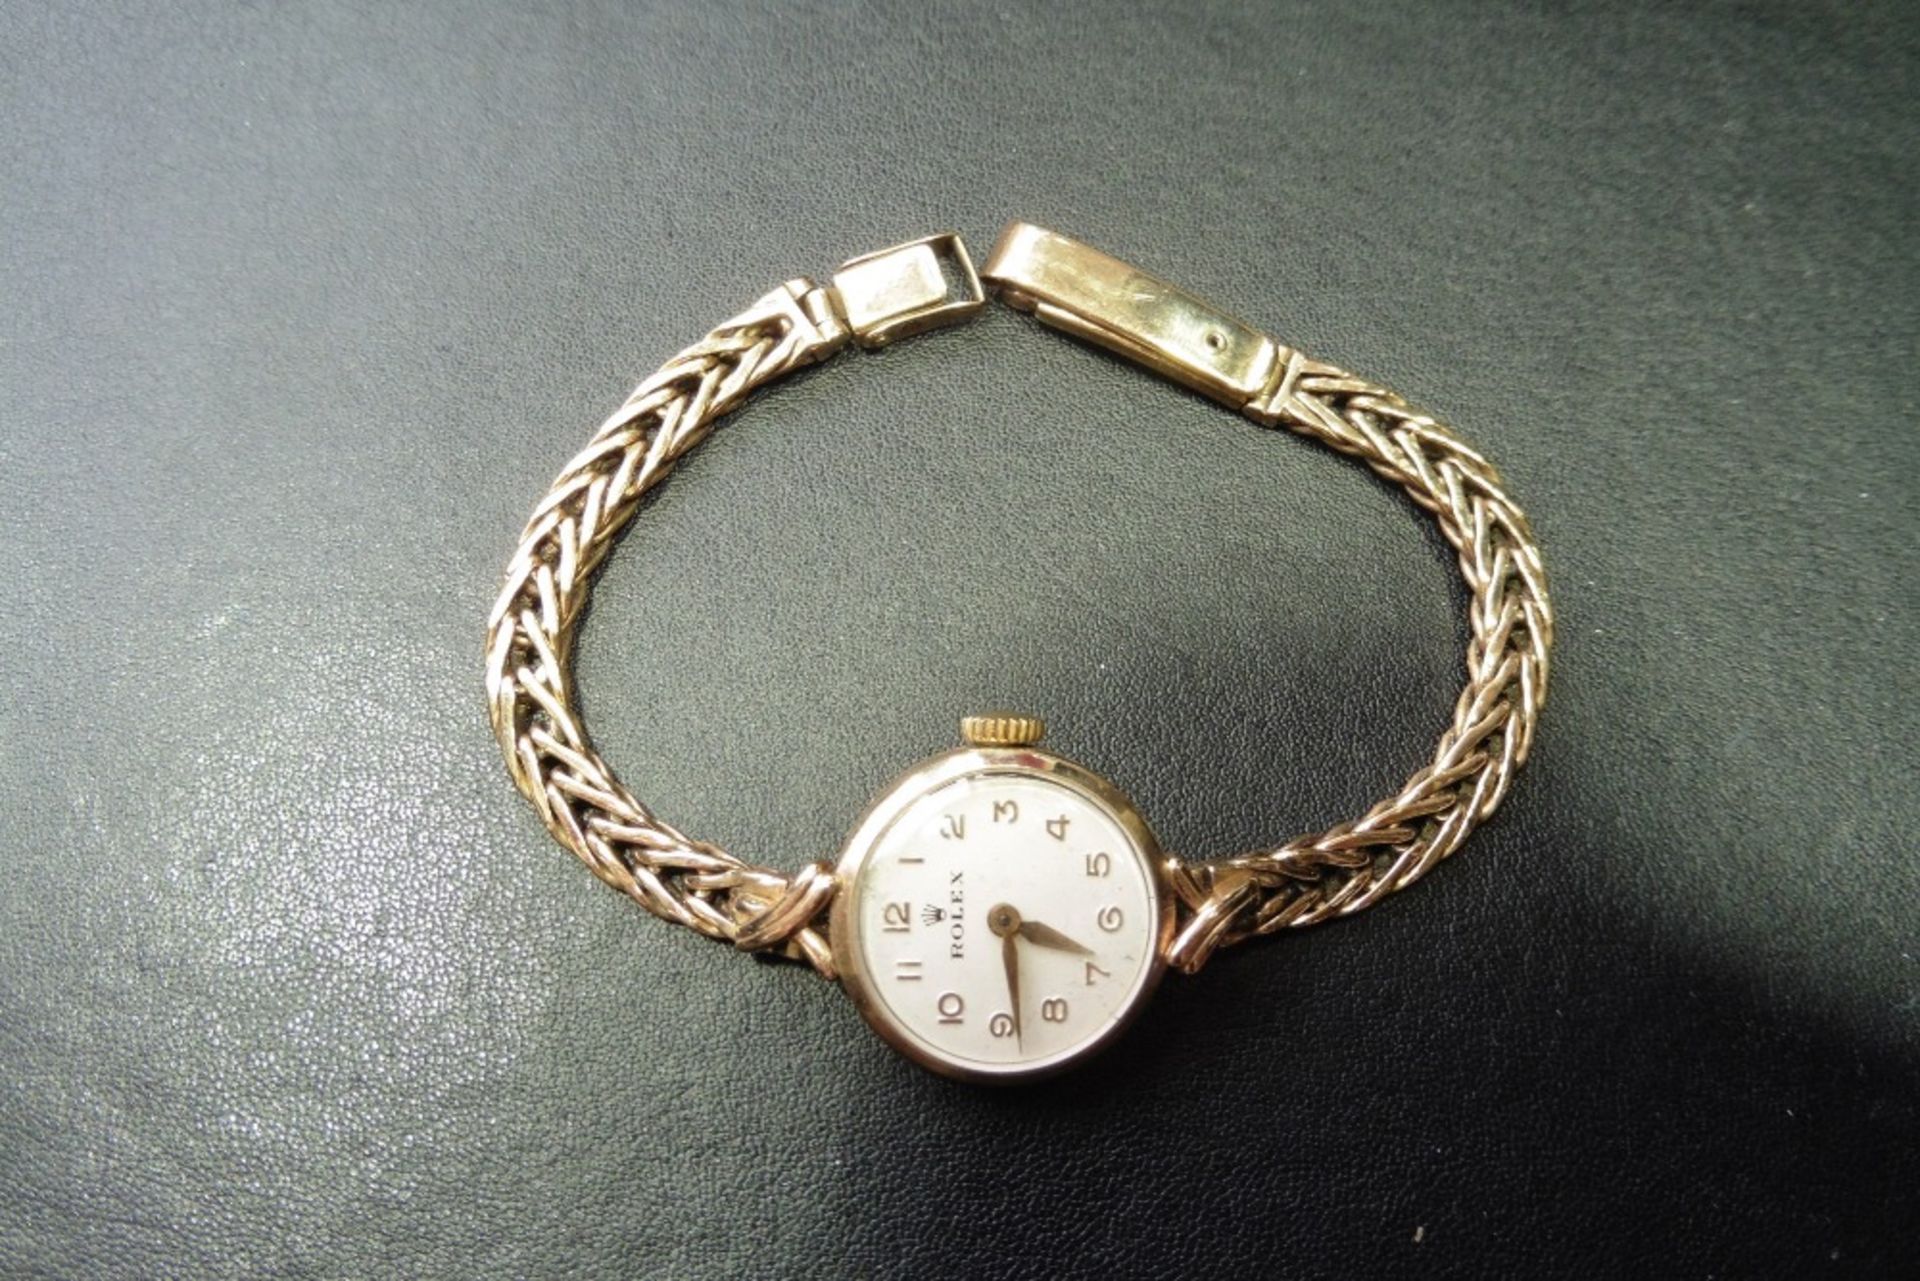 Pre-owned 9ct yellow gold cocktail style ladies rolex watch.  Bracelet strap, Round face with